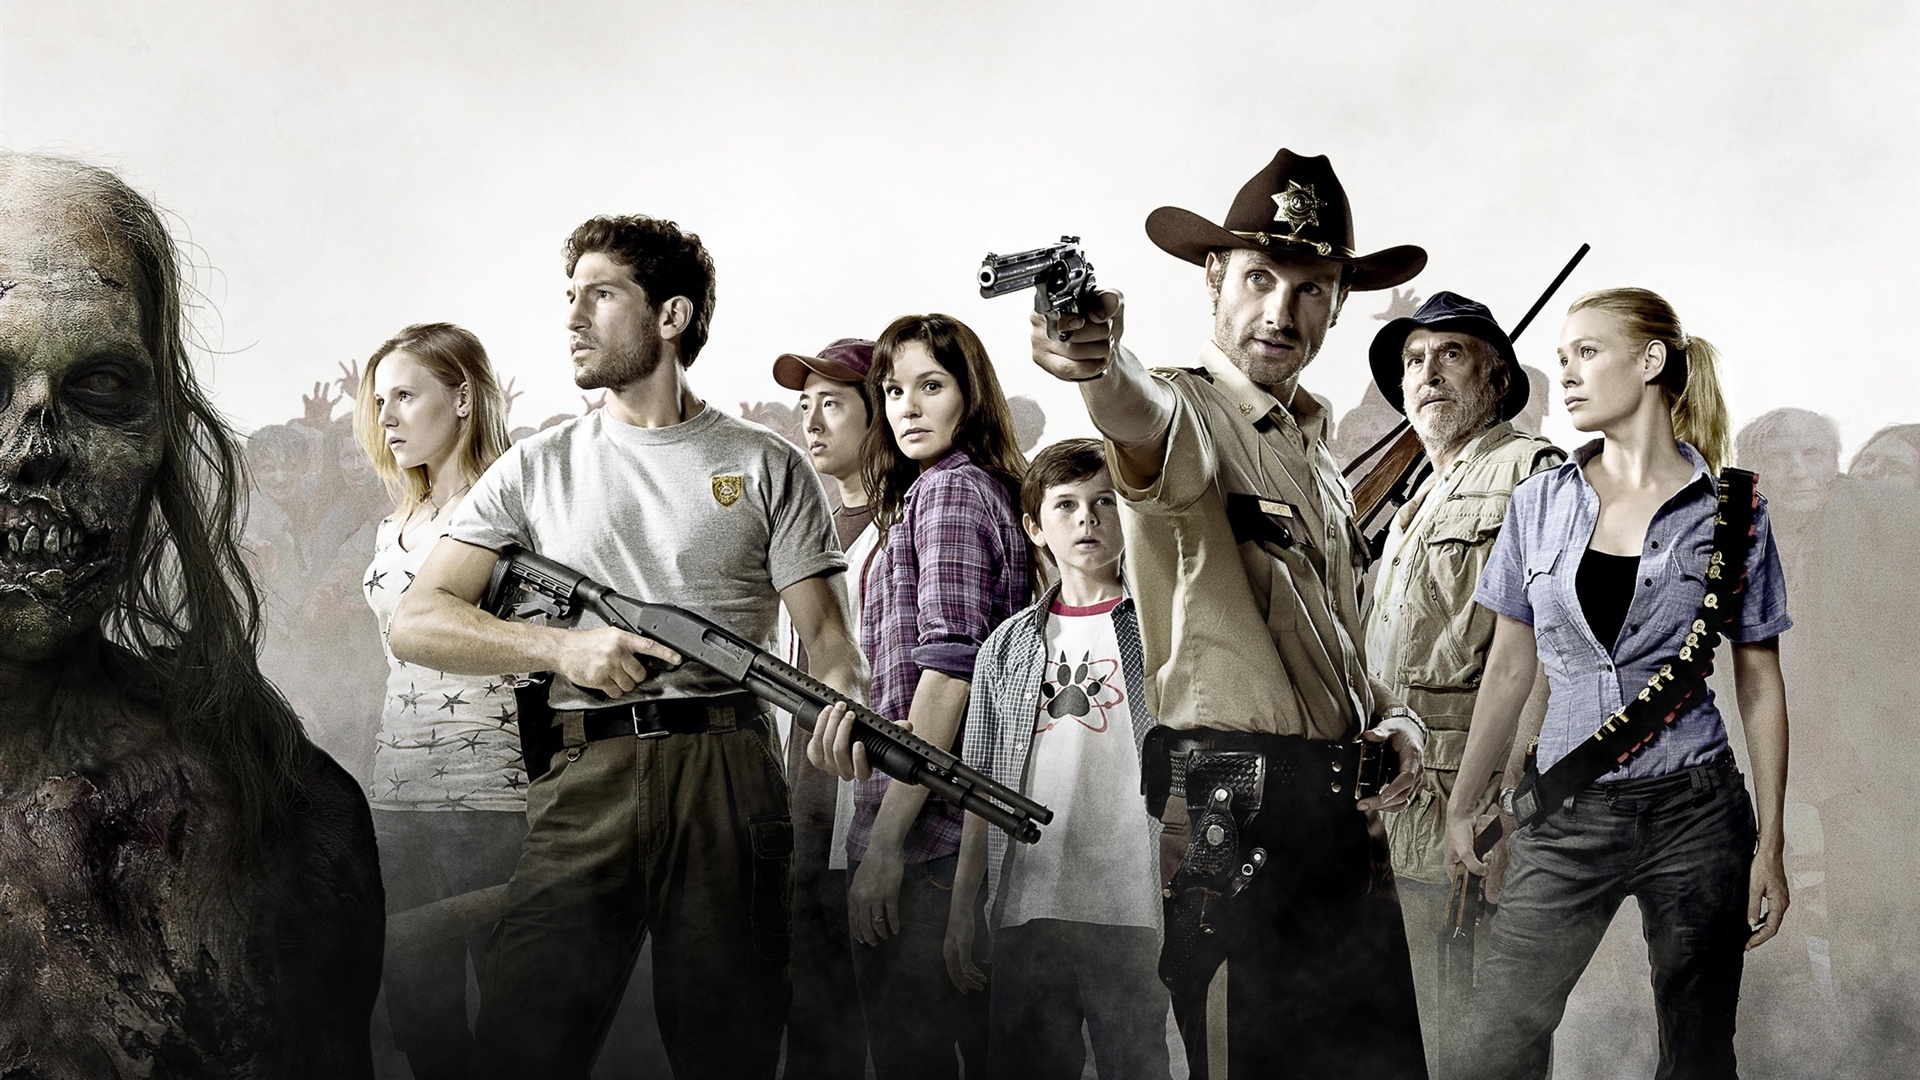 Andrea The Walking Dead Andrew Lincoln Carl Grimes Cast Chandler Riggs Laurie Holden Lori Grimes Ric 1920x1080